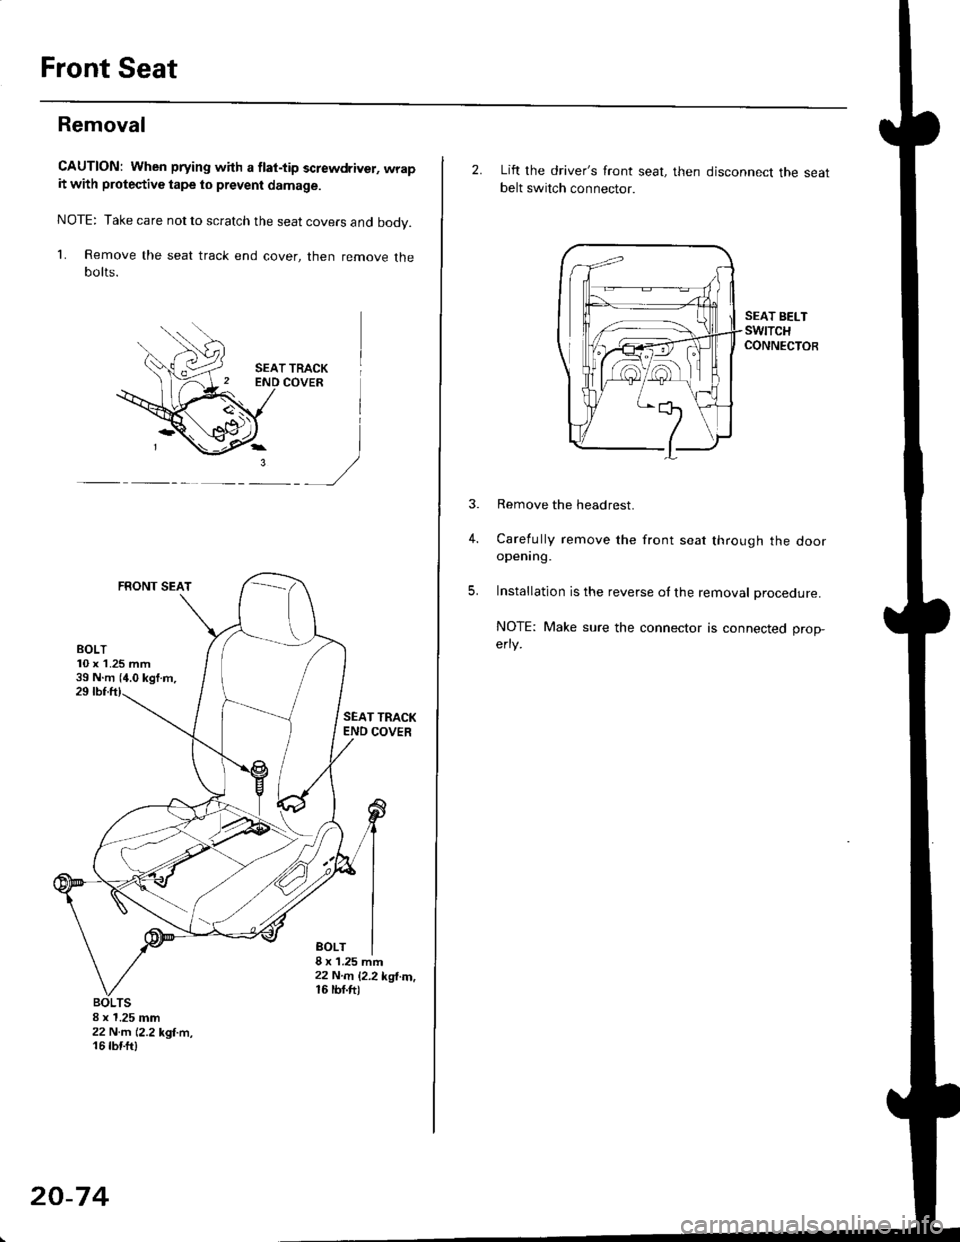 HONDA CIVIC 1997 6.G Workshop Manual Front Seat
Removal
CAUTION: When prying with a flat-tip screwdriver, wrapit with protective tape lo prevent damage.
NOTE: Take care not to scratch the seat covers and body.
1. Remove the seat track en